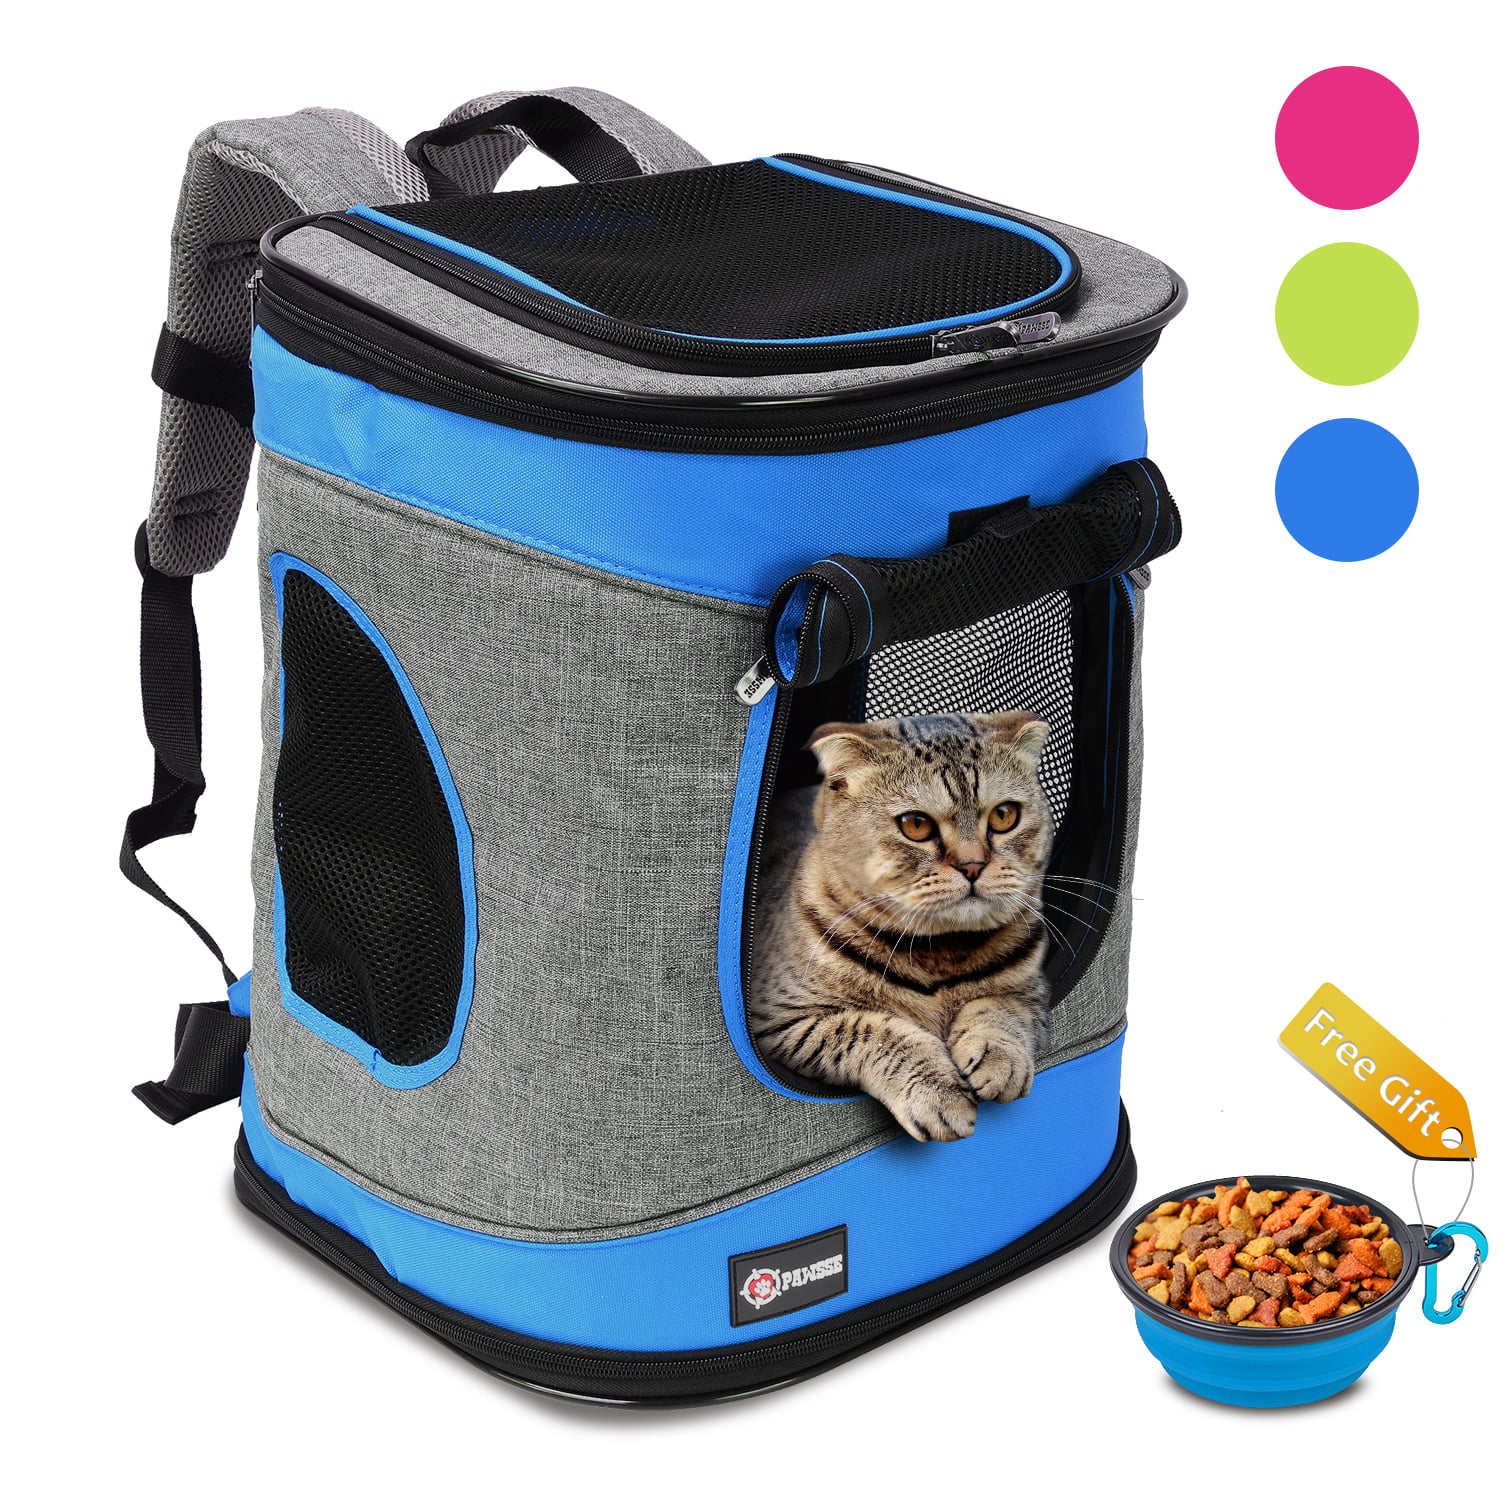 Pawsse Pet Carrier Backpack for Dogs and Cats up to 15 LBS Comfort Dog Cat Carrier Travel Bag ...